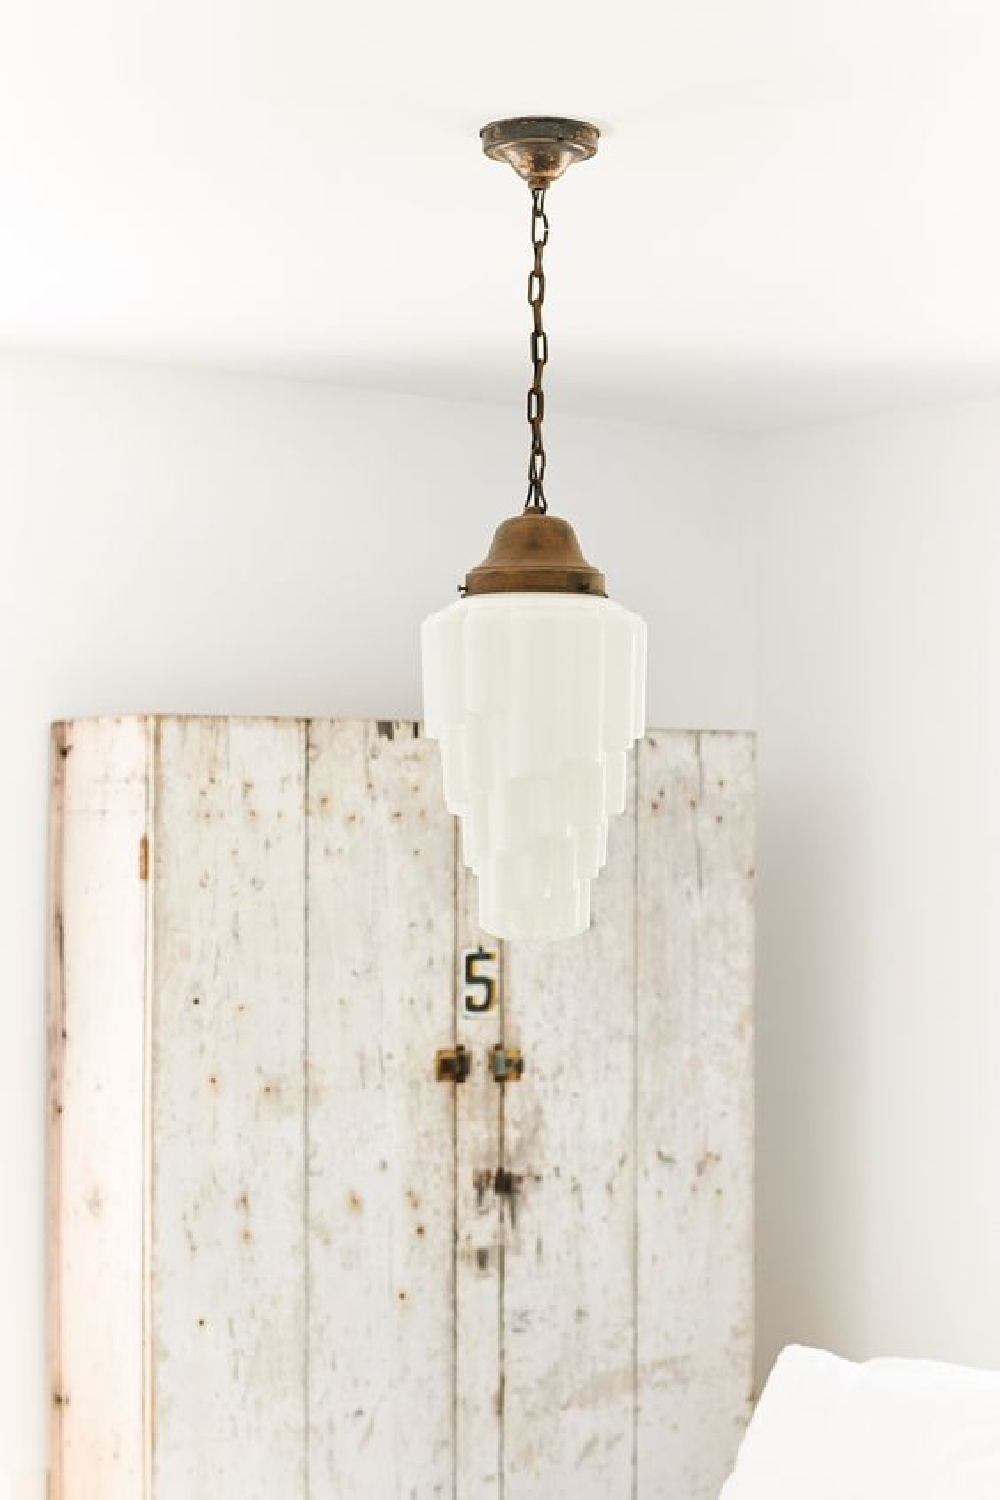 Leanne Ford designed bedroom with rustic white painted cabinet and vintage pendant.